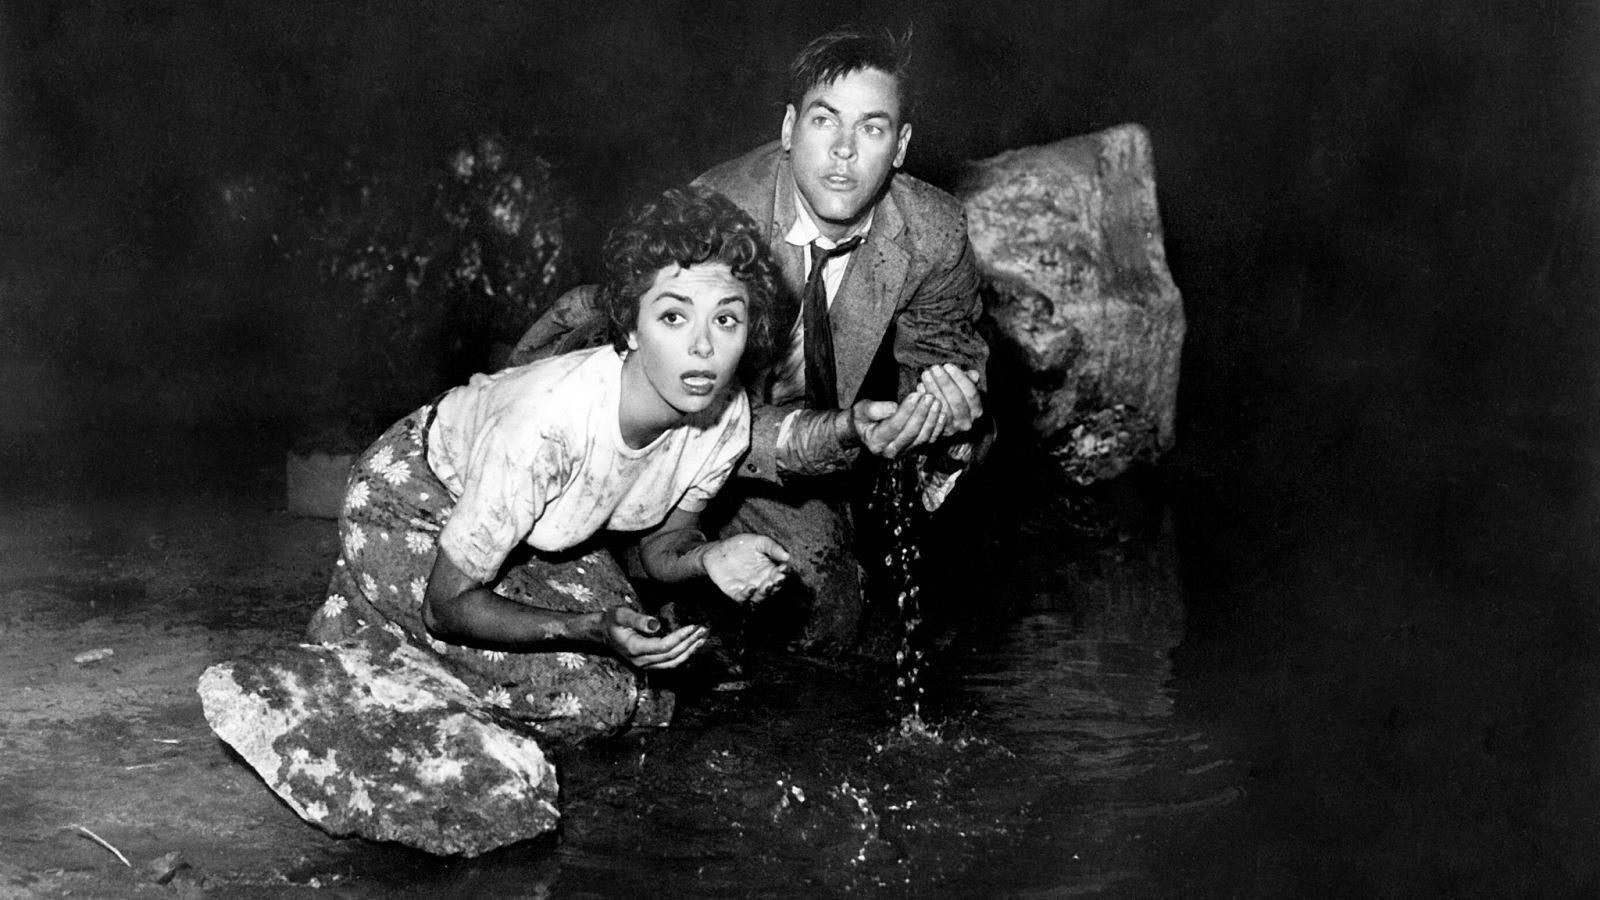 Invasion of the Body Snatchers (1956) — Science on Screen